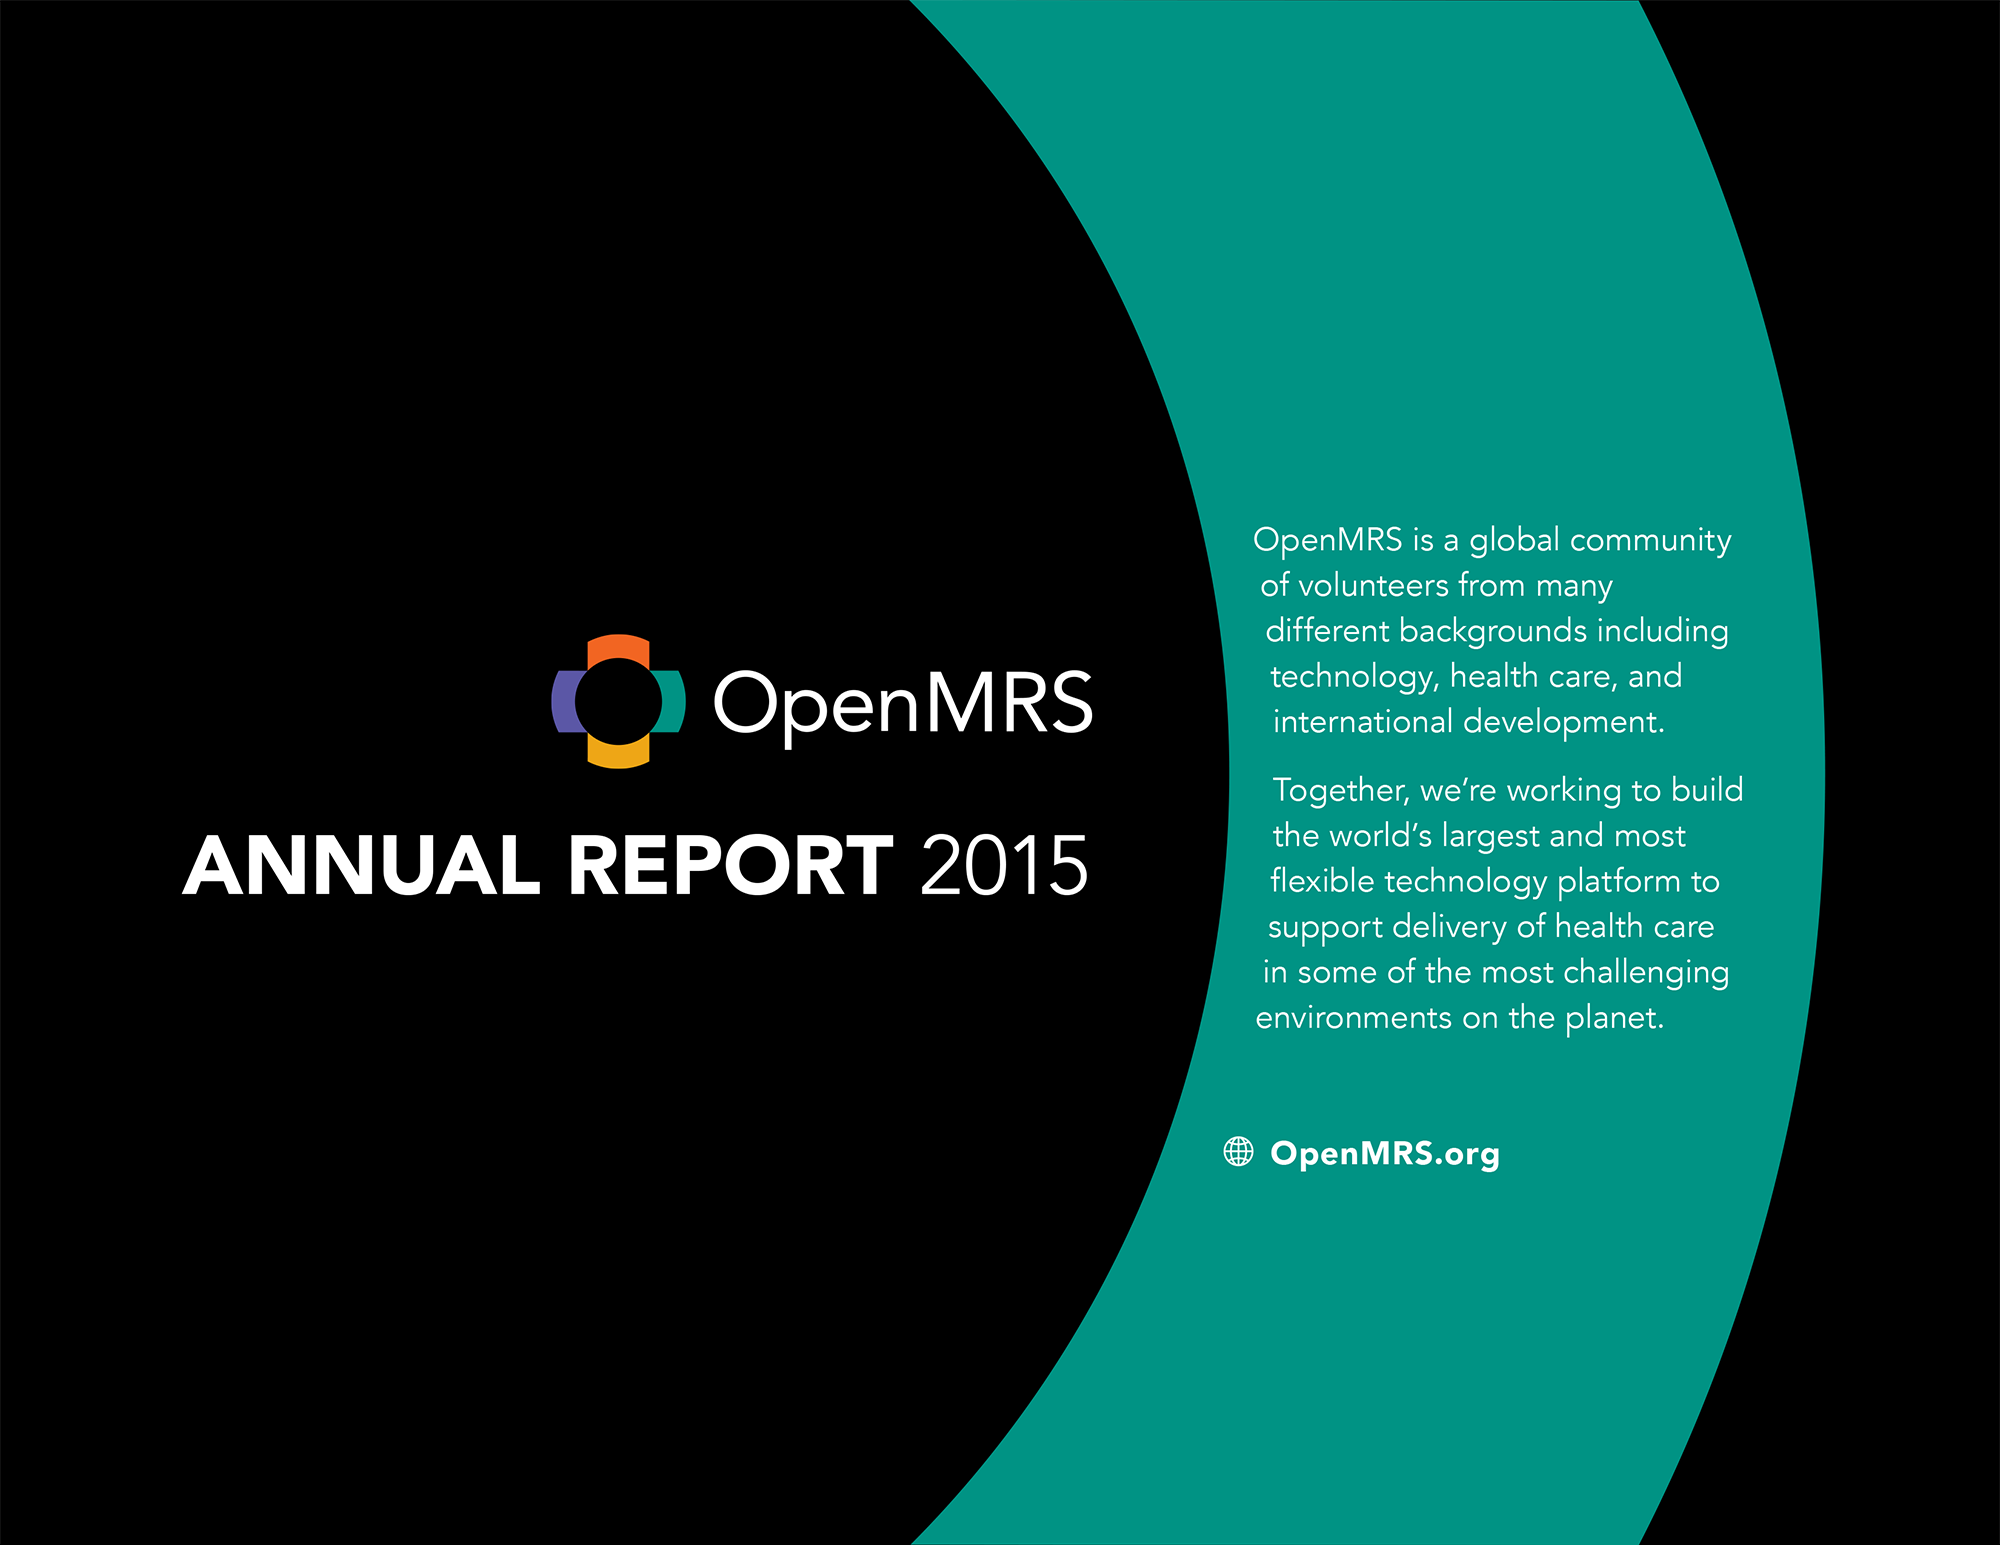 OpenMRS Annual Report 2015